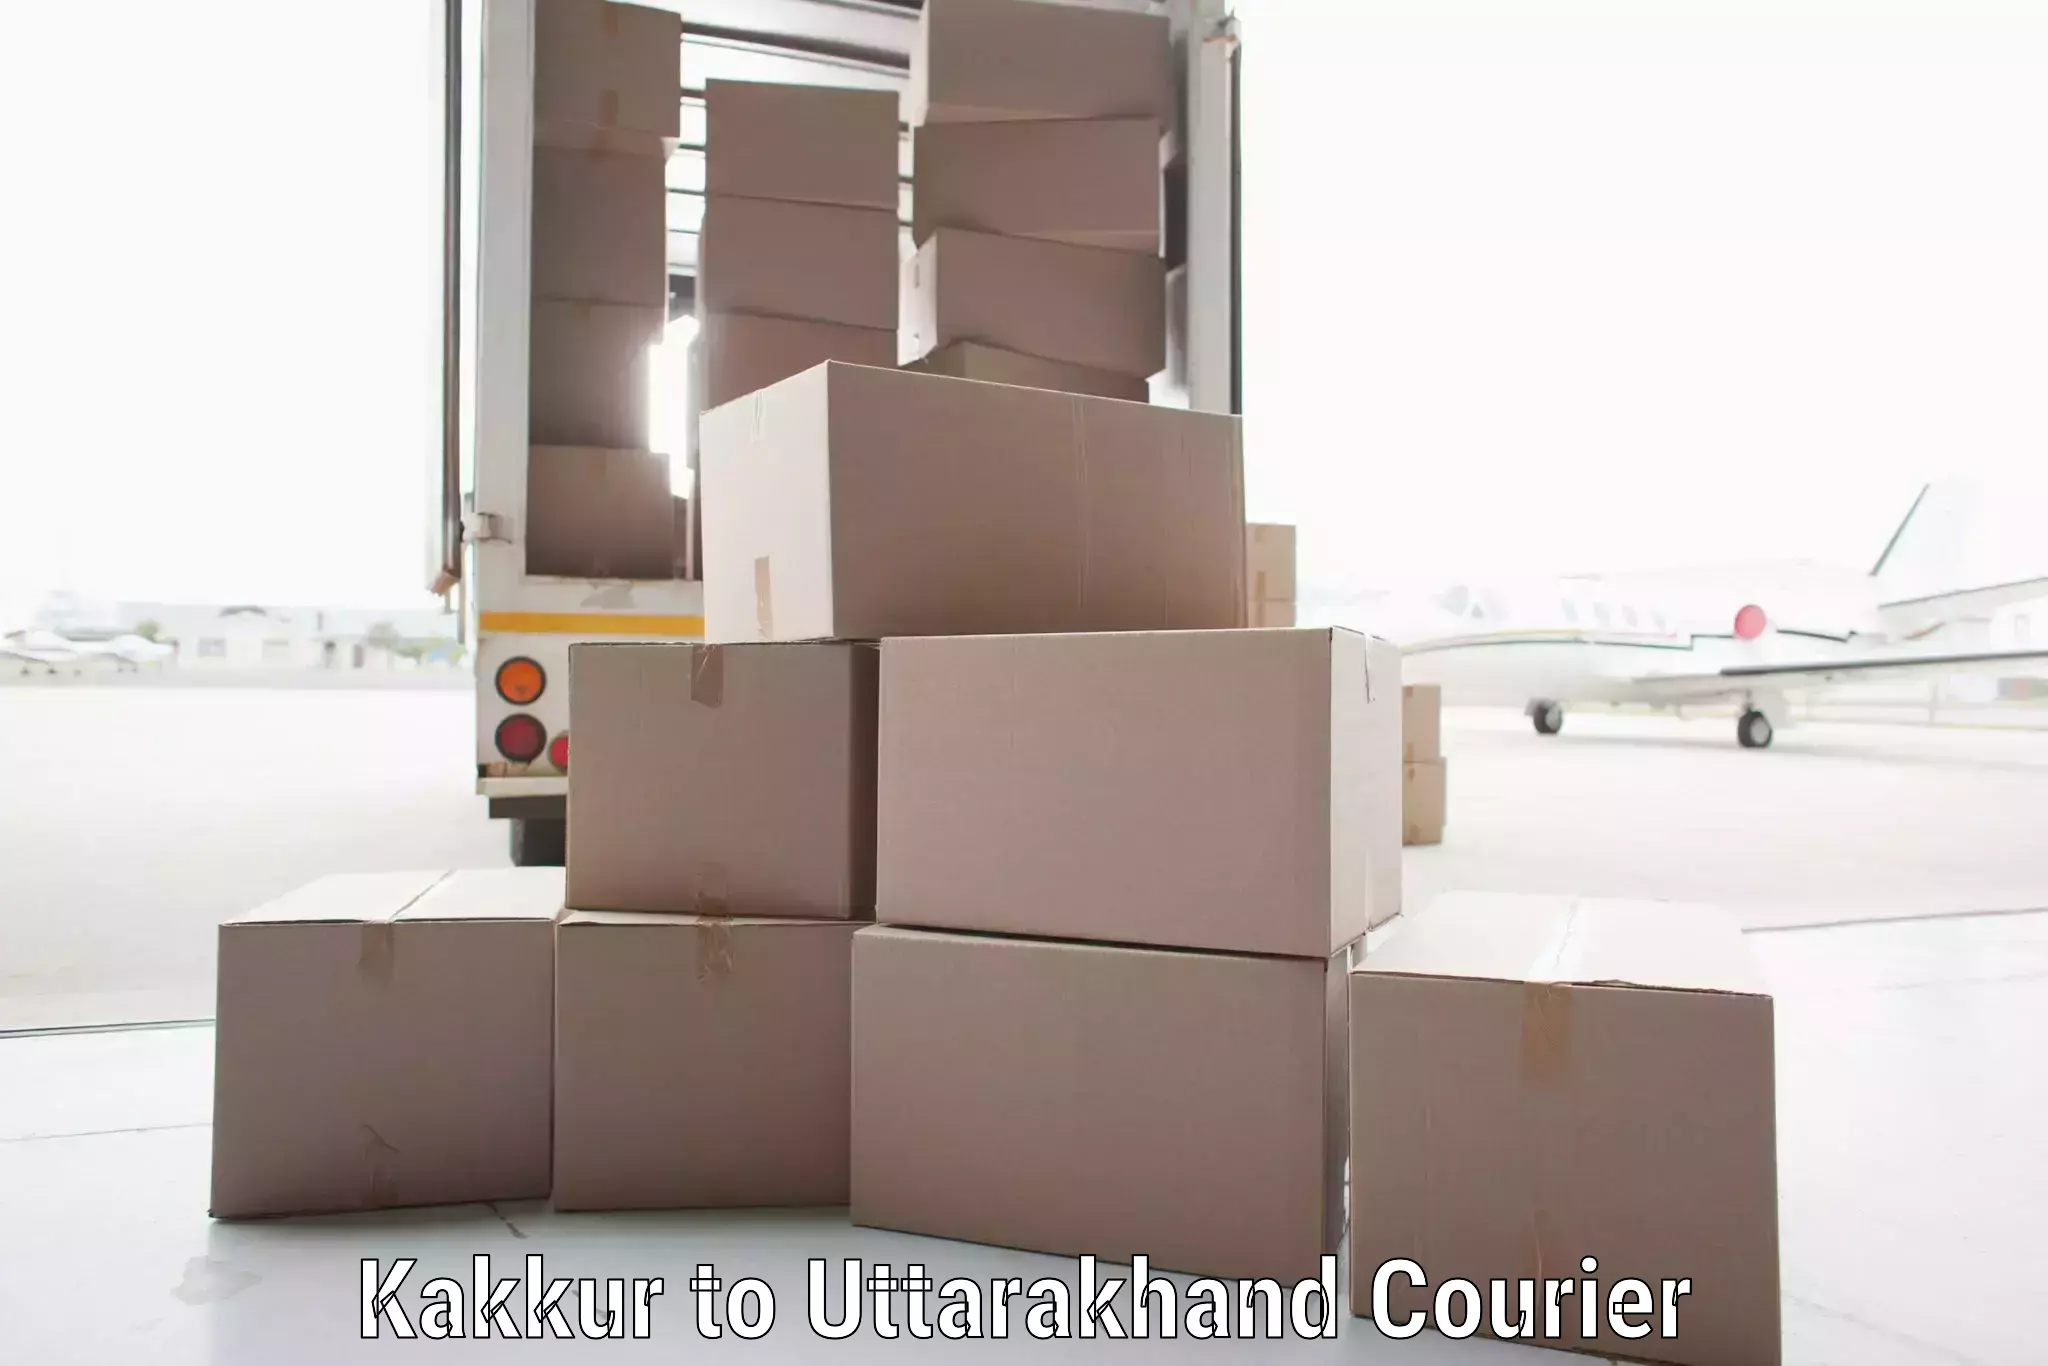 Full-service courier options in Kakkur to Rudraprayag